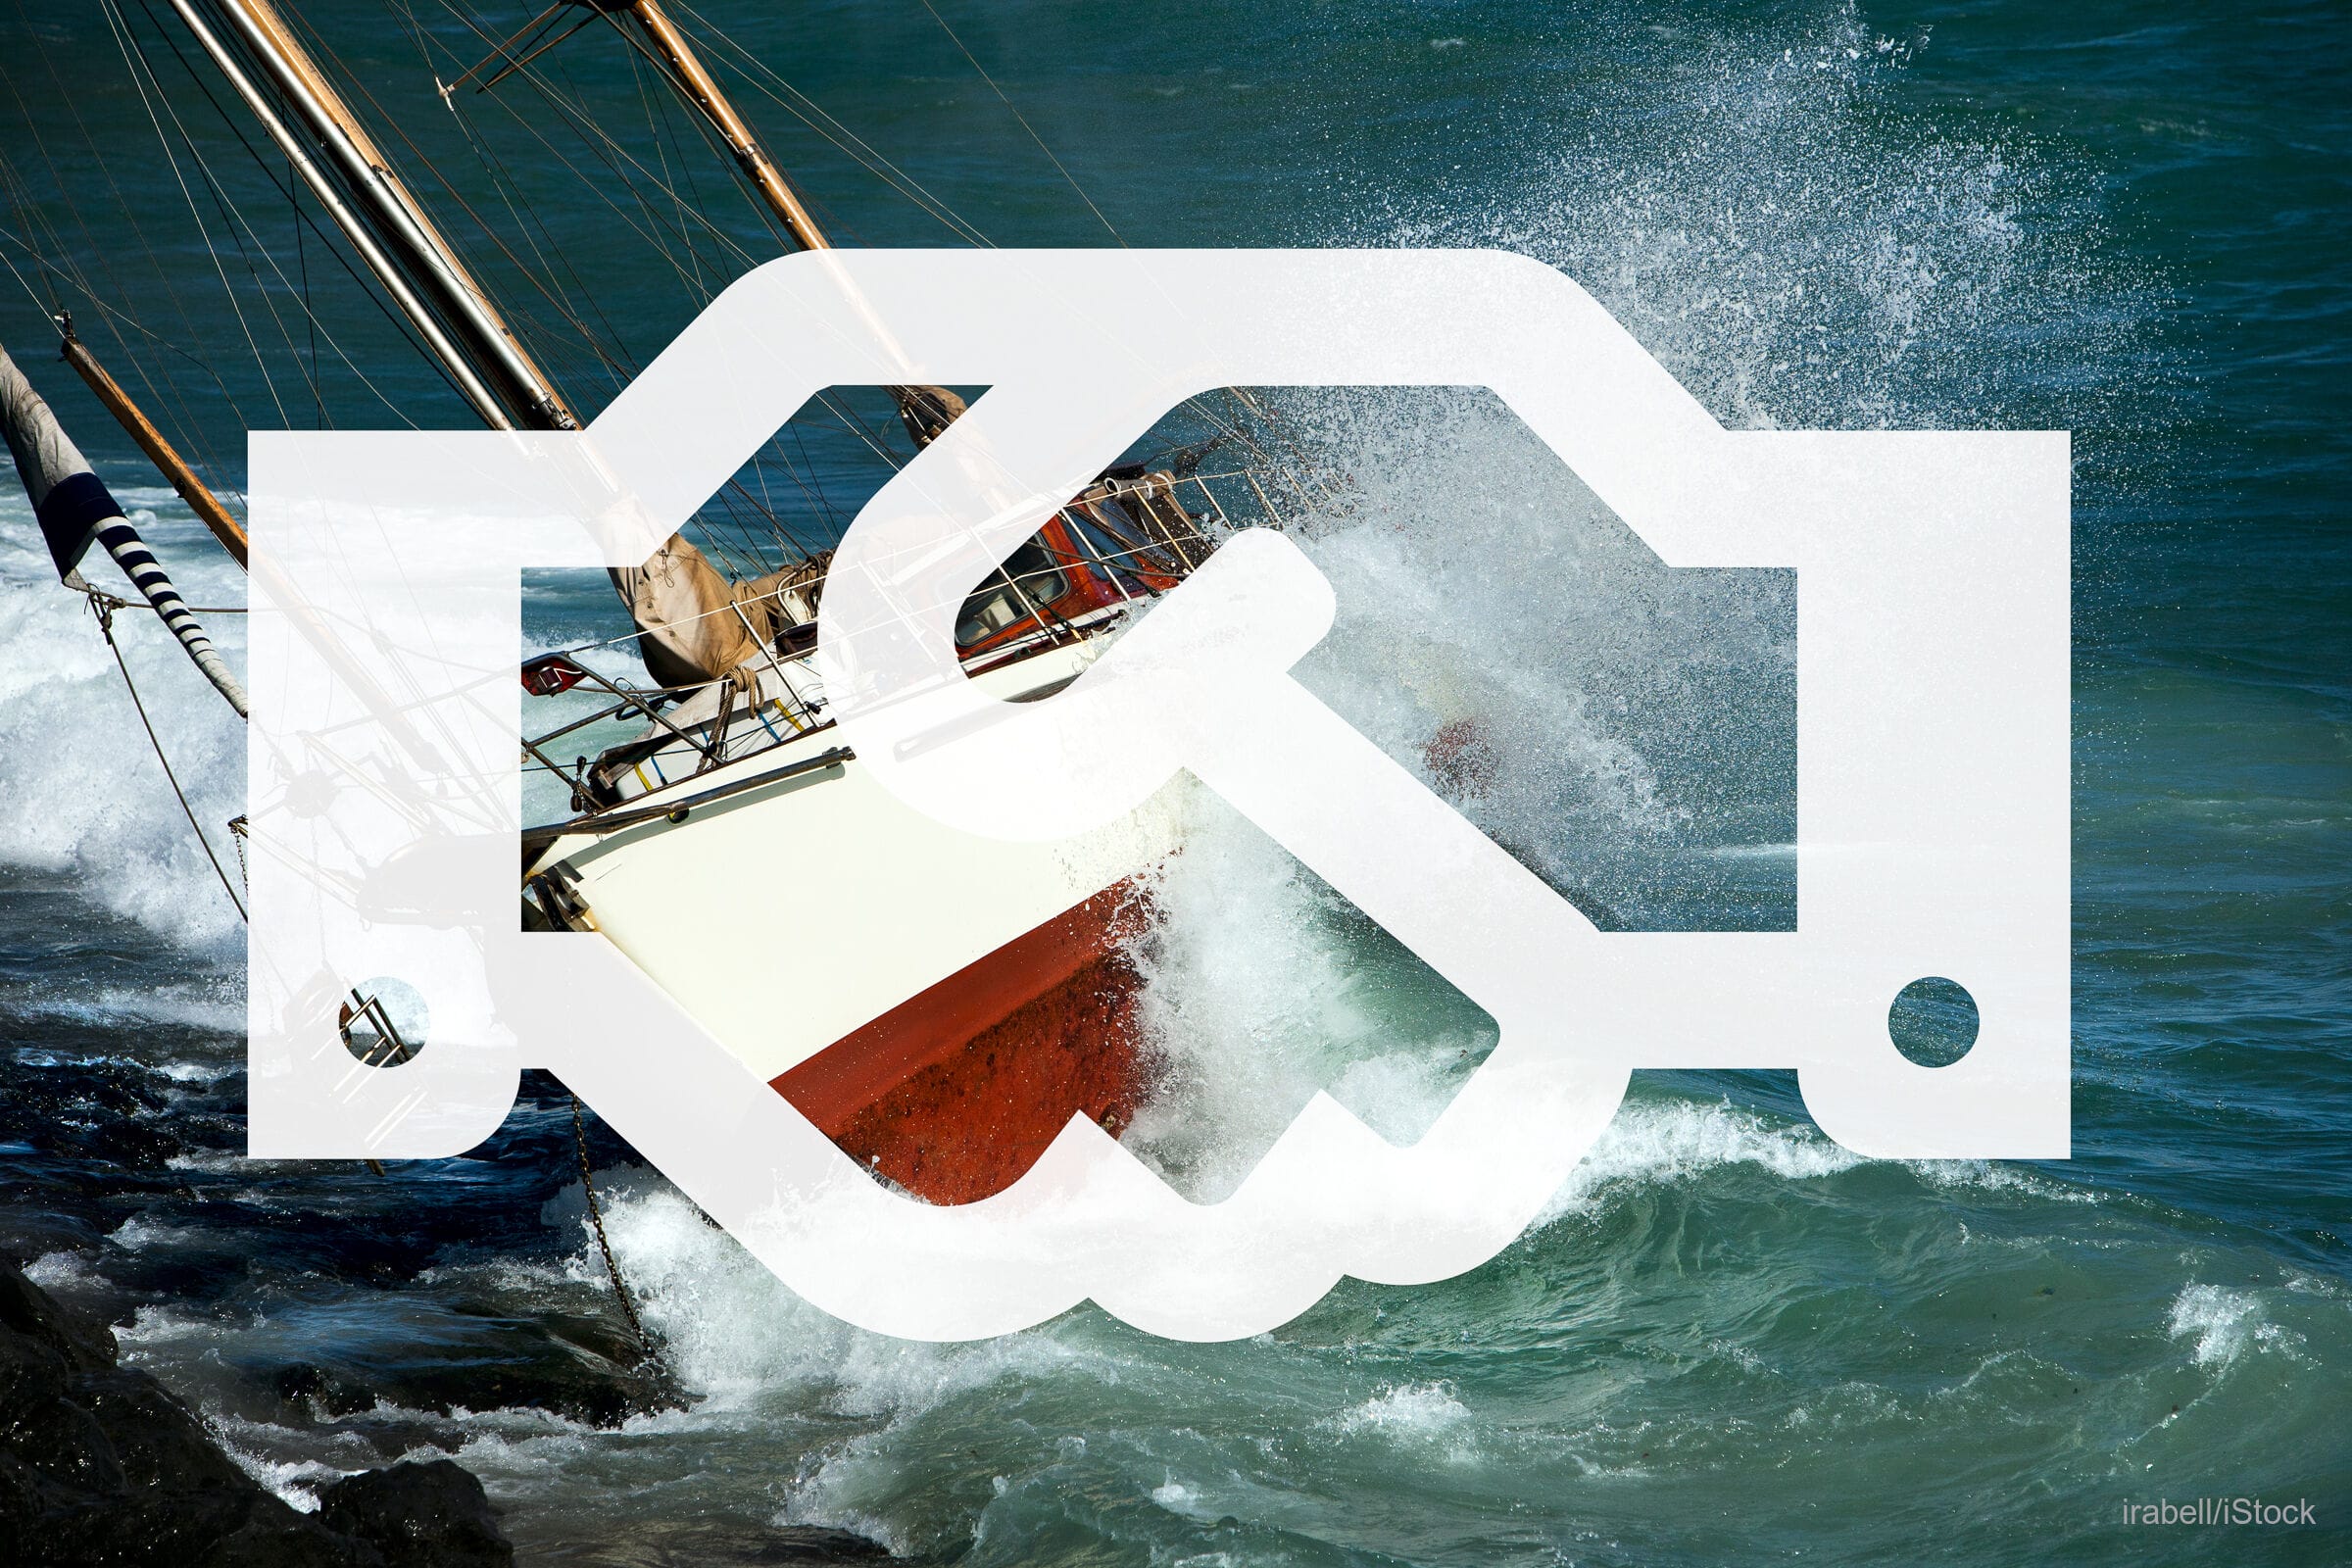 29 Tips To Get Insurance For Offshore Voyaging—Negotiating Cover